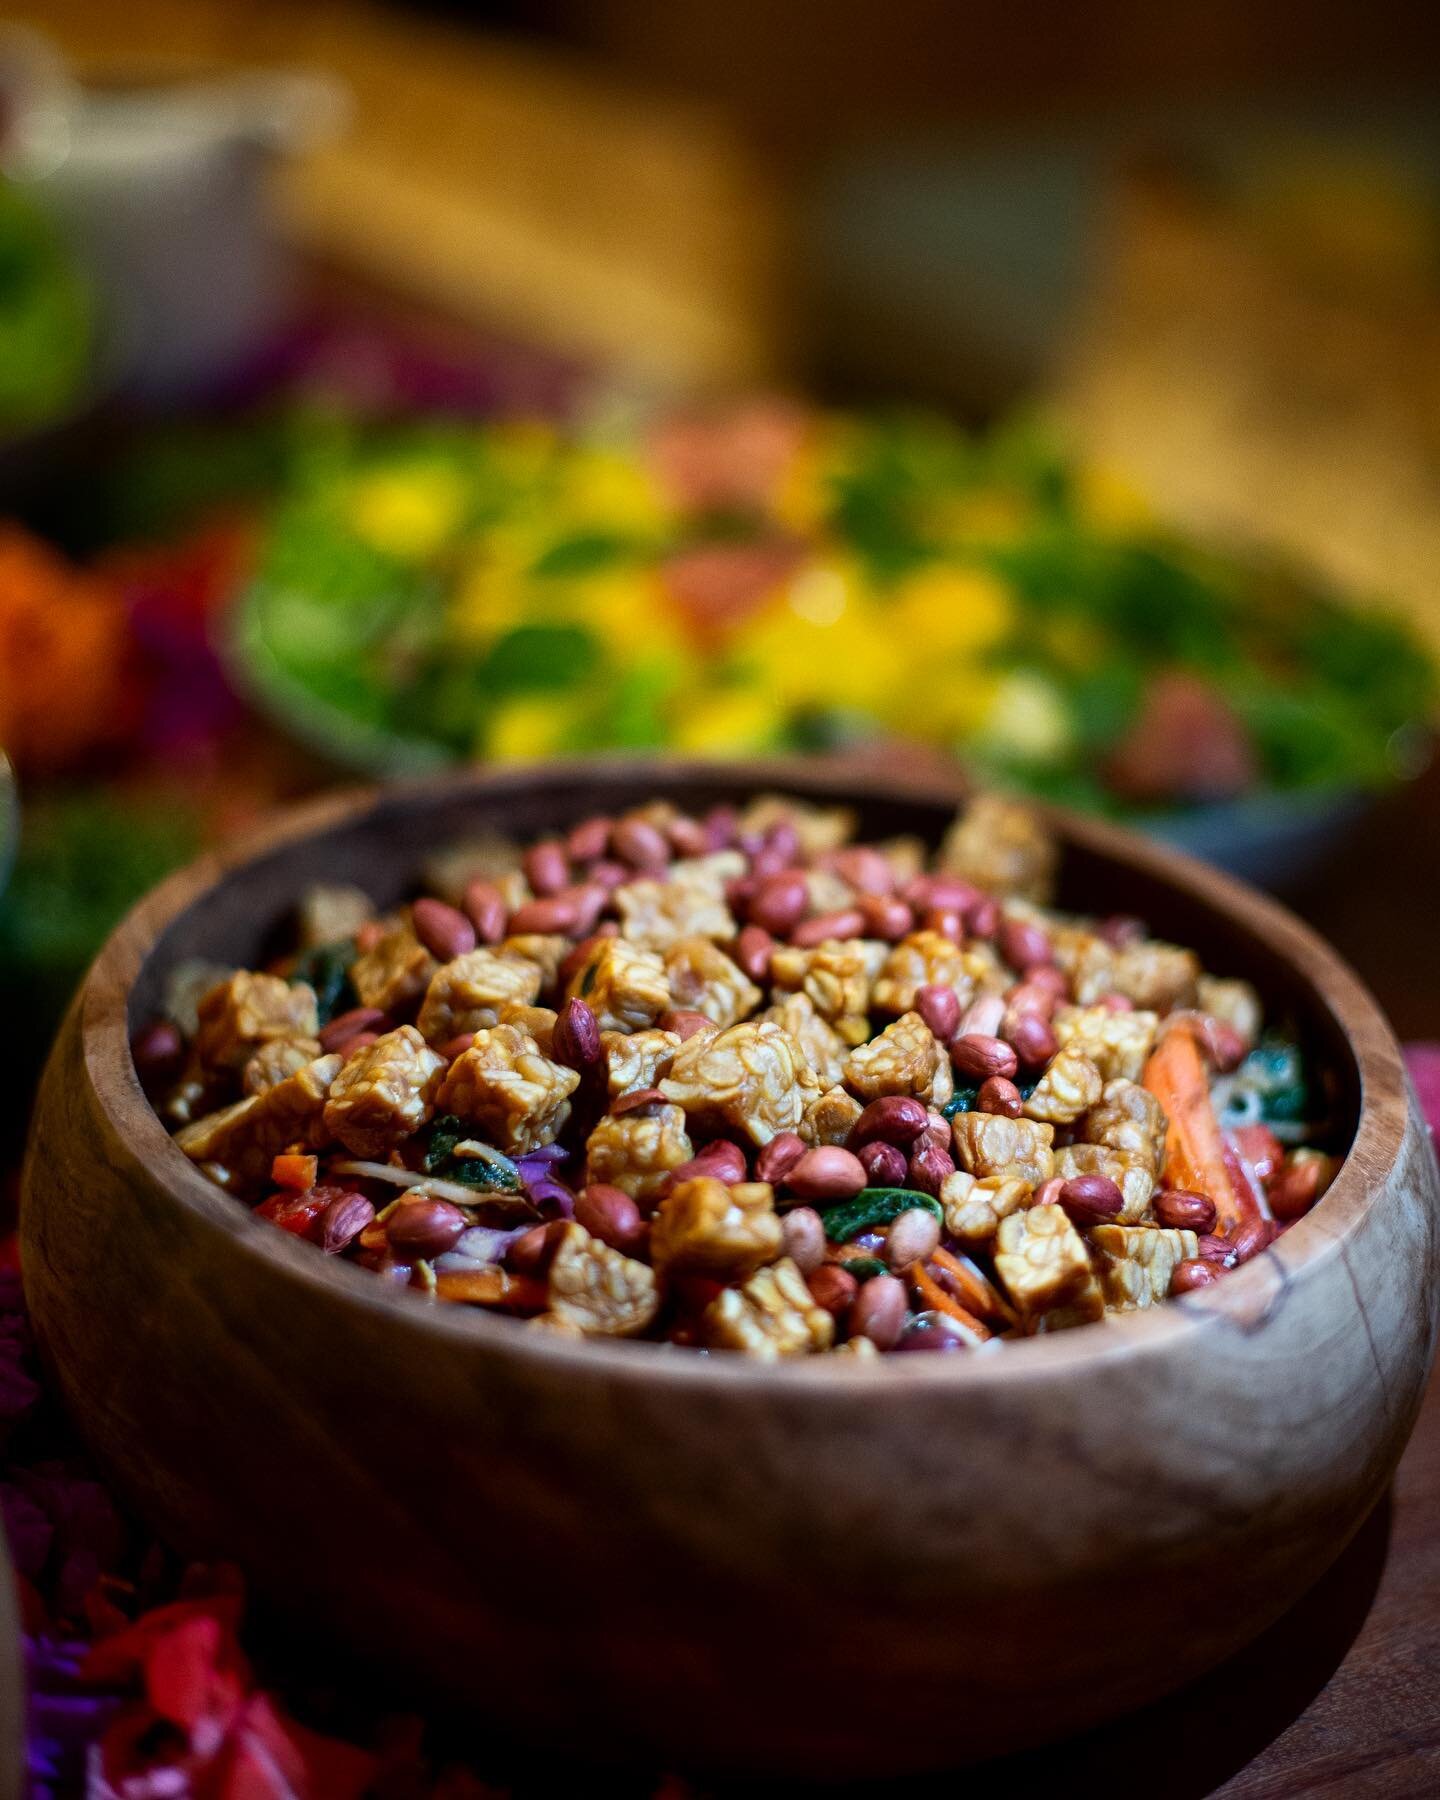 Love the rich autumnal colours of this beautiful (and photogenic) salad by @itfusch @motionfitnessfoods that we shot on location @in_balancewellness bali retreat @thenomadicstate 

#foodcolour #autumnsalad #eatwithyoureyes #culinarynutrition #healthy